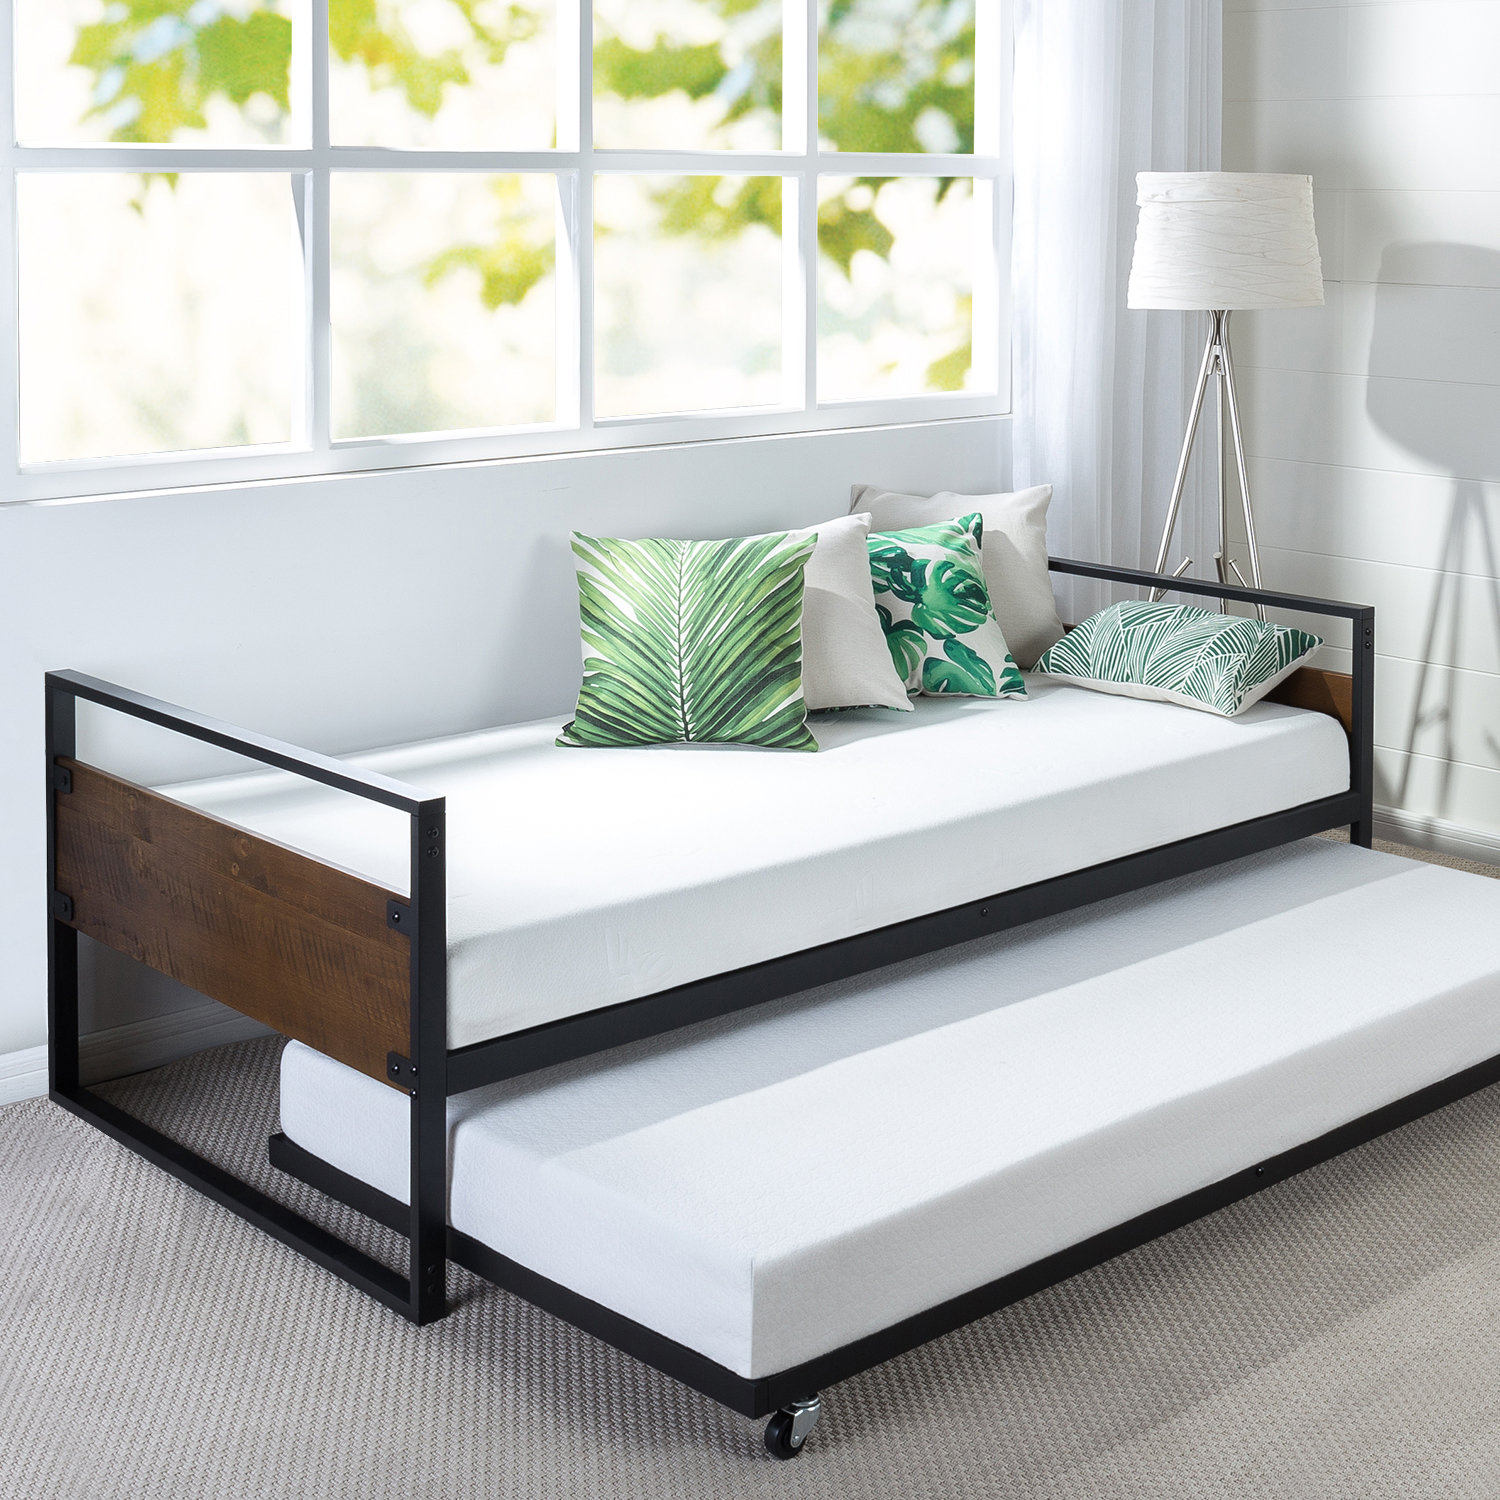 twin daybeds you love barrett daybed with trundle cherry corner accent table quickview innovative coffee designer desk nightstand ideas backyard shade gresham furniture dark wood